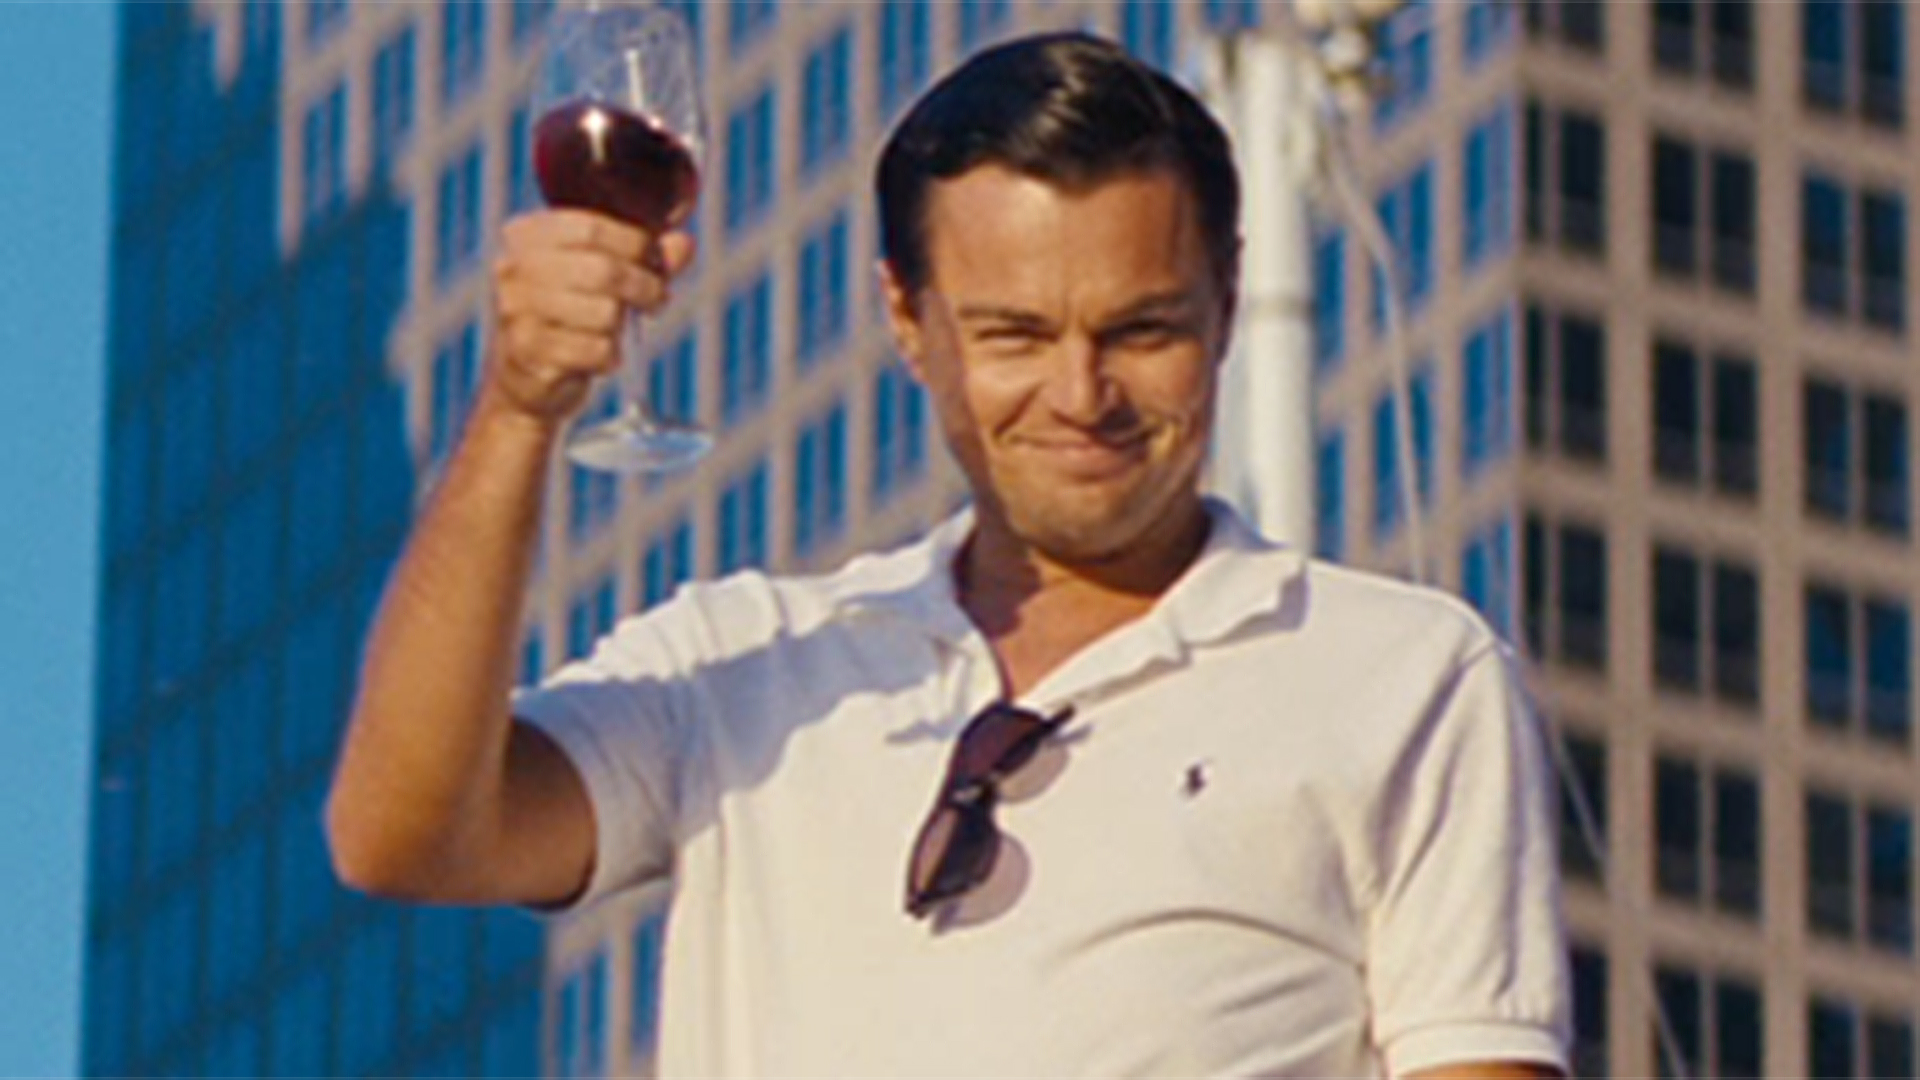 Watch The Wolf Of Wall Street